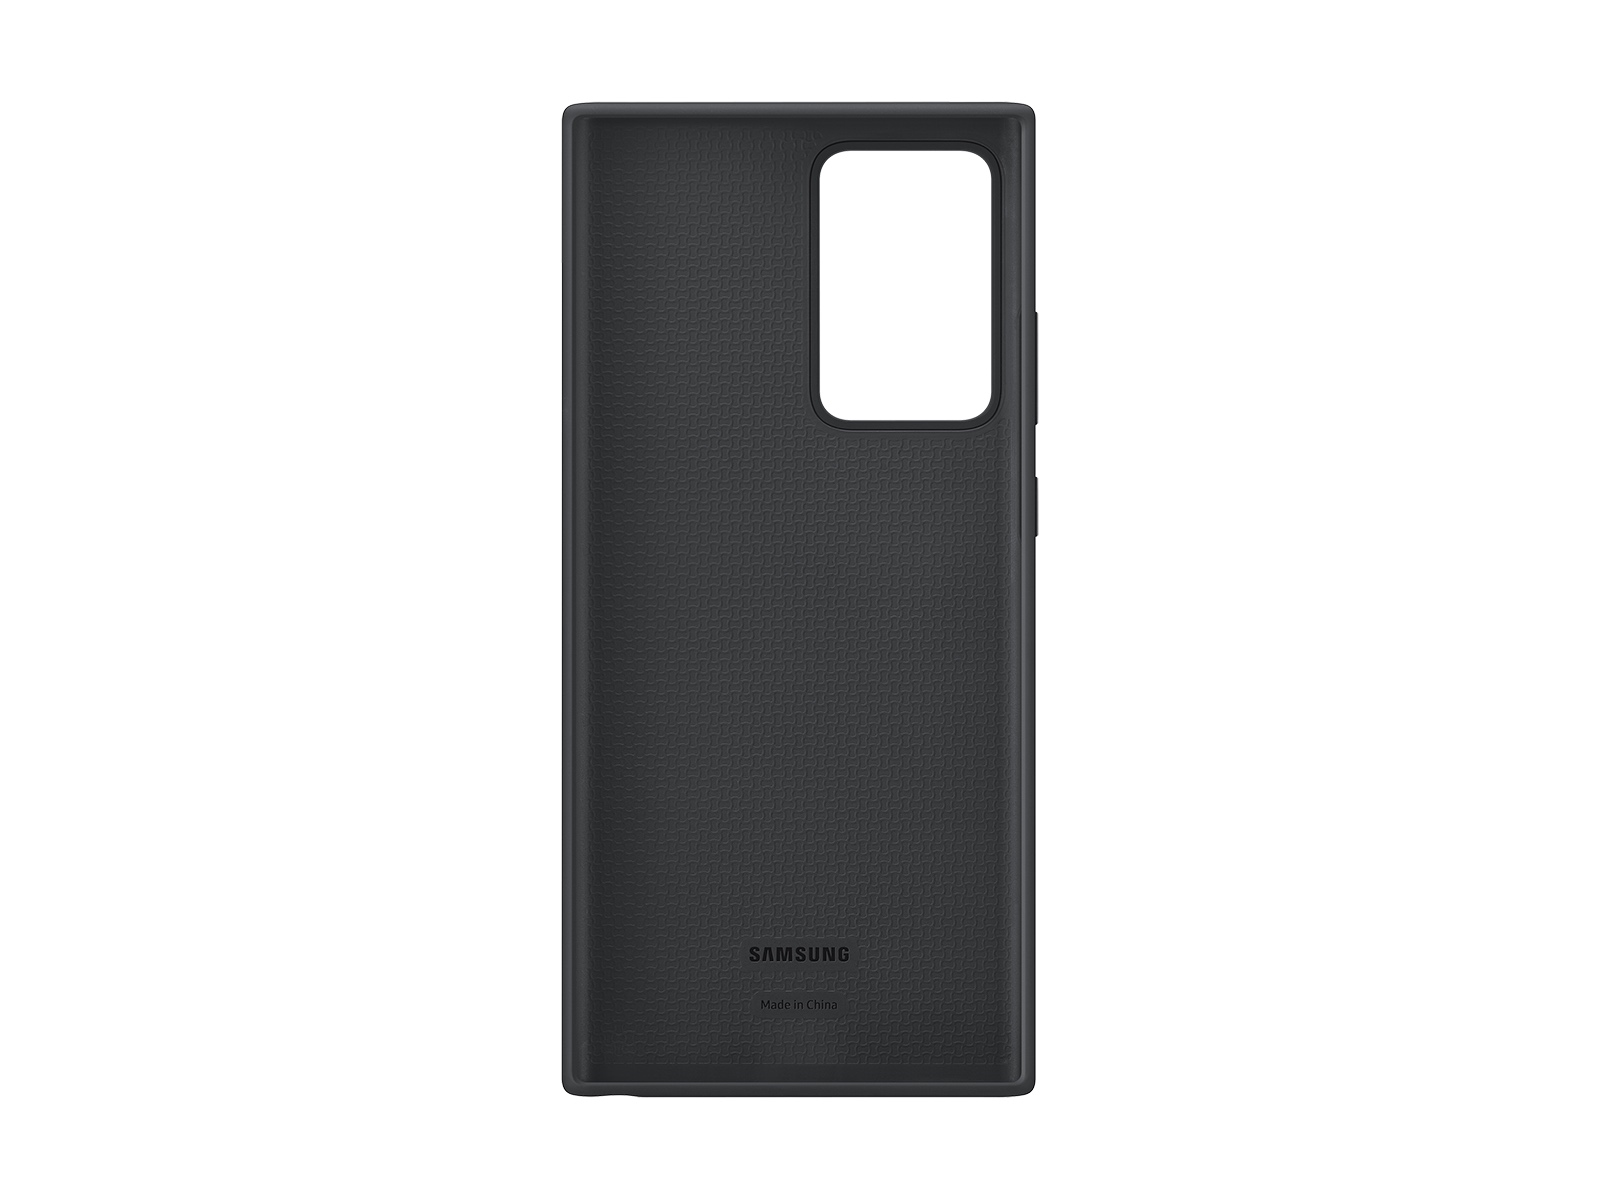 Thumbnail image of Galaxy Note20 Ultra 5G Silicone Cover, Black